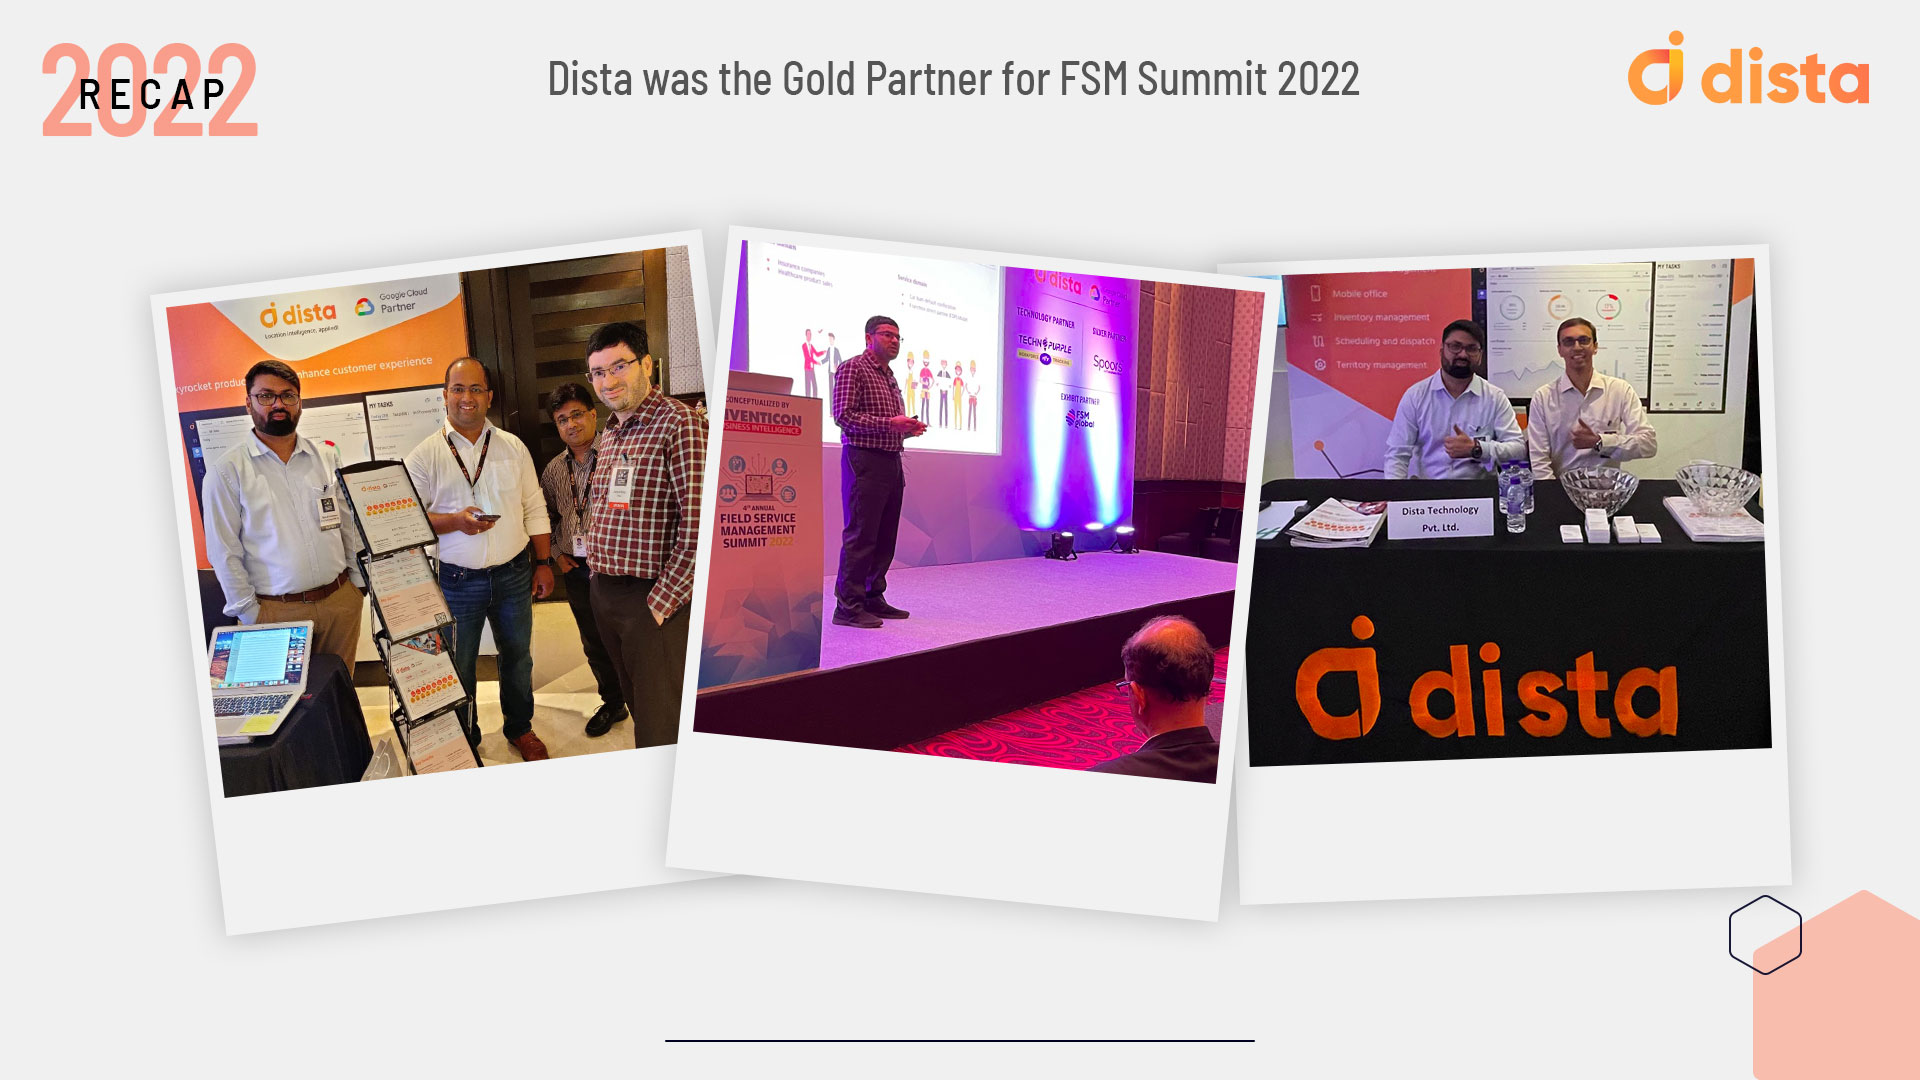 Dista Was the Gold Partner for FSM Summit 2022